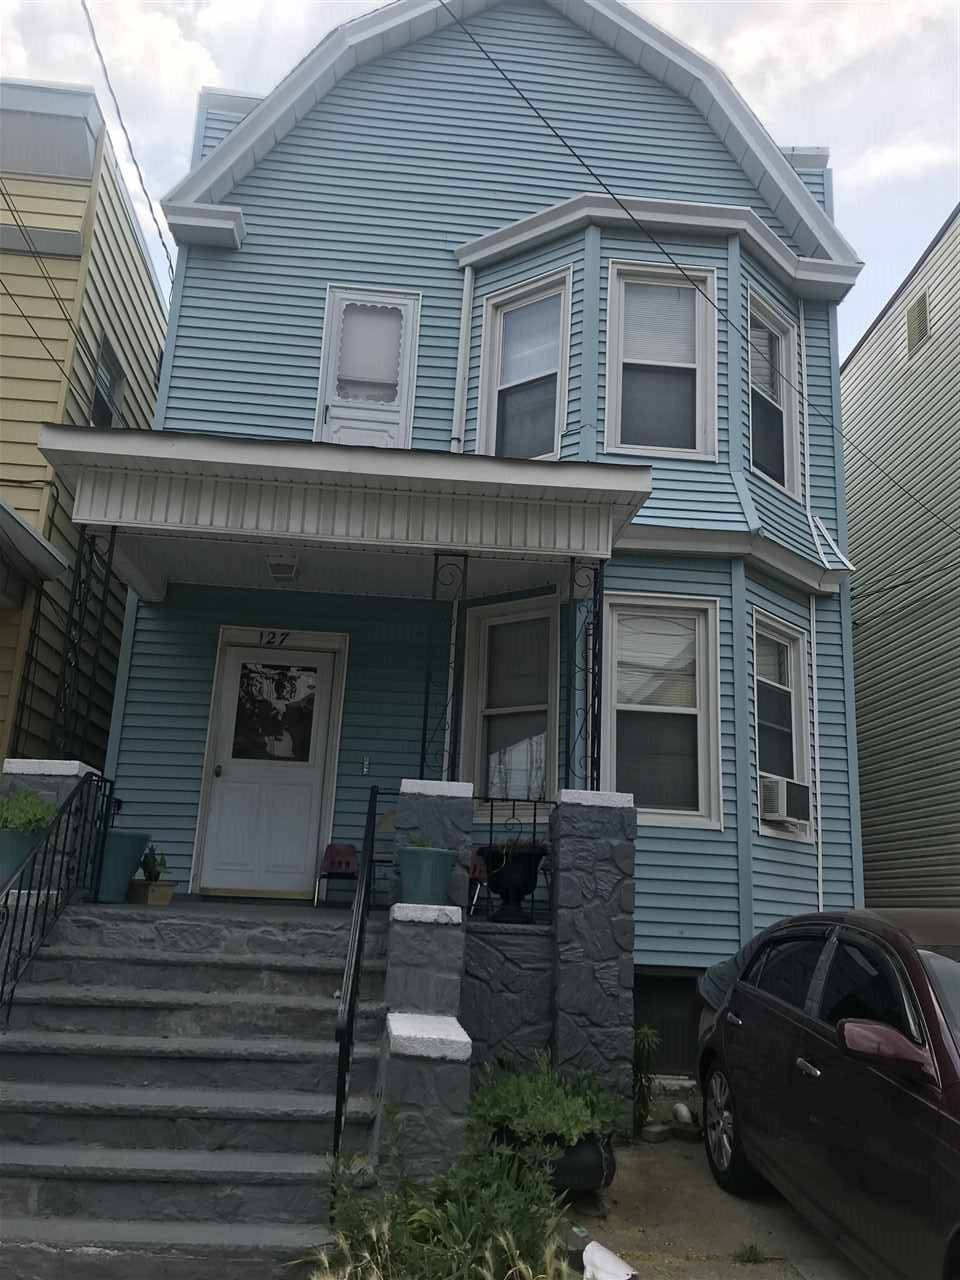 detached 2 family separate heat and hot water with parking